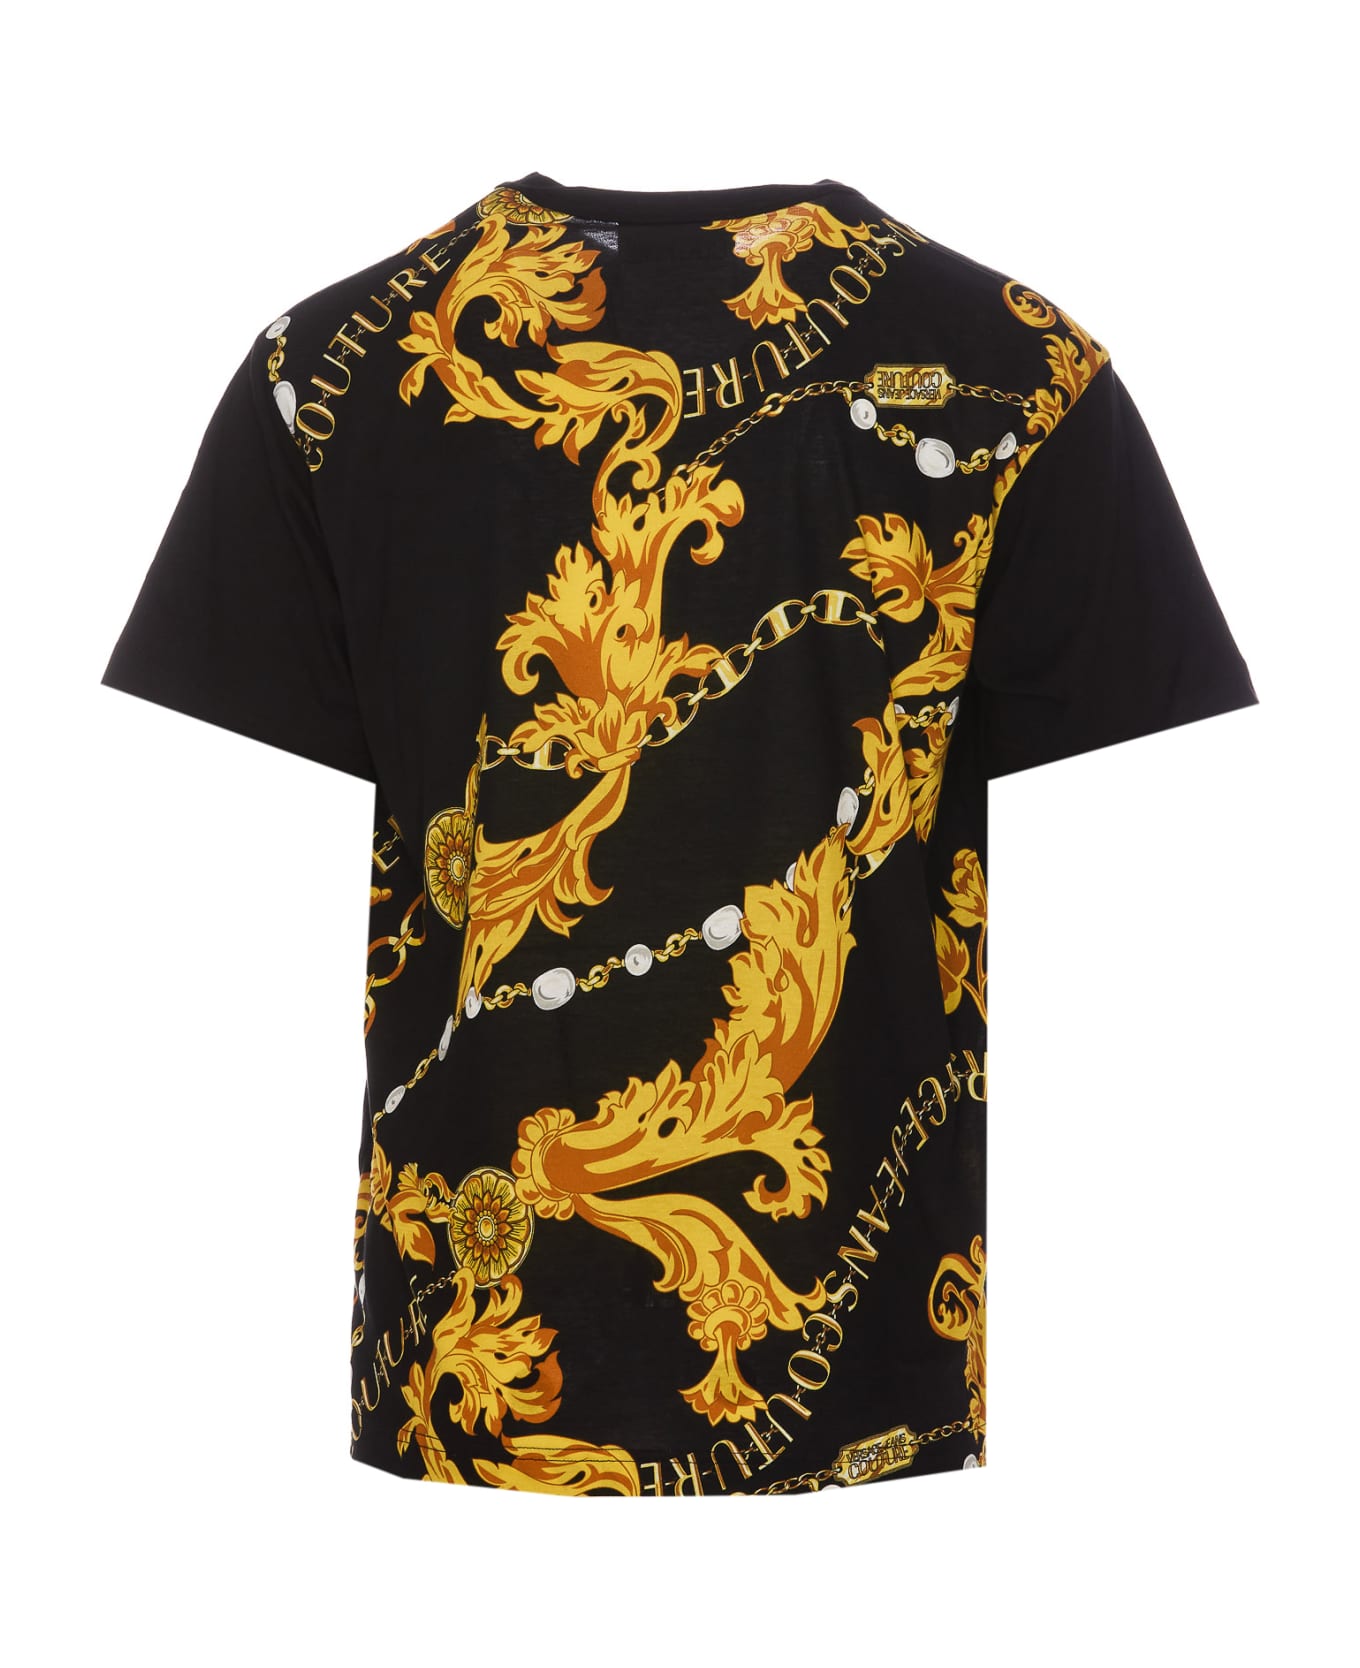 Versace Jeans Couture Chain Couture Print T-shirt - Black Gold シャツ